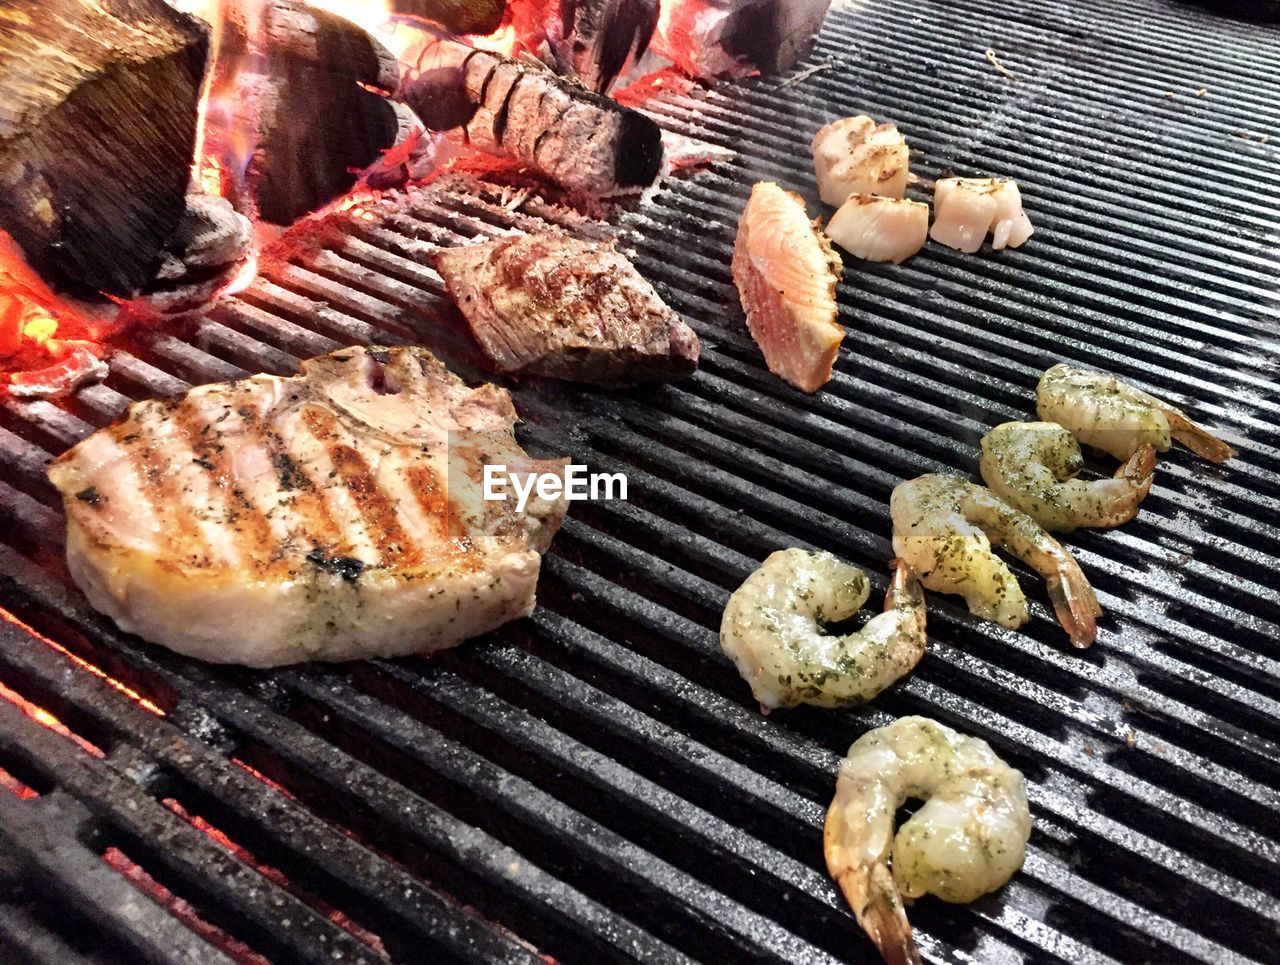 Various proteins on the woodfired grill